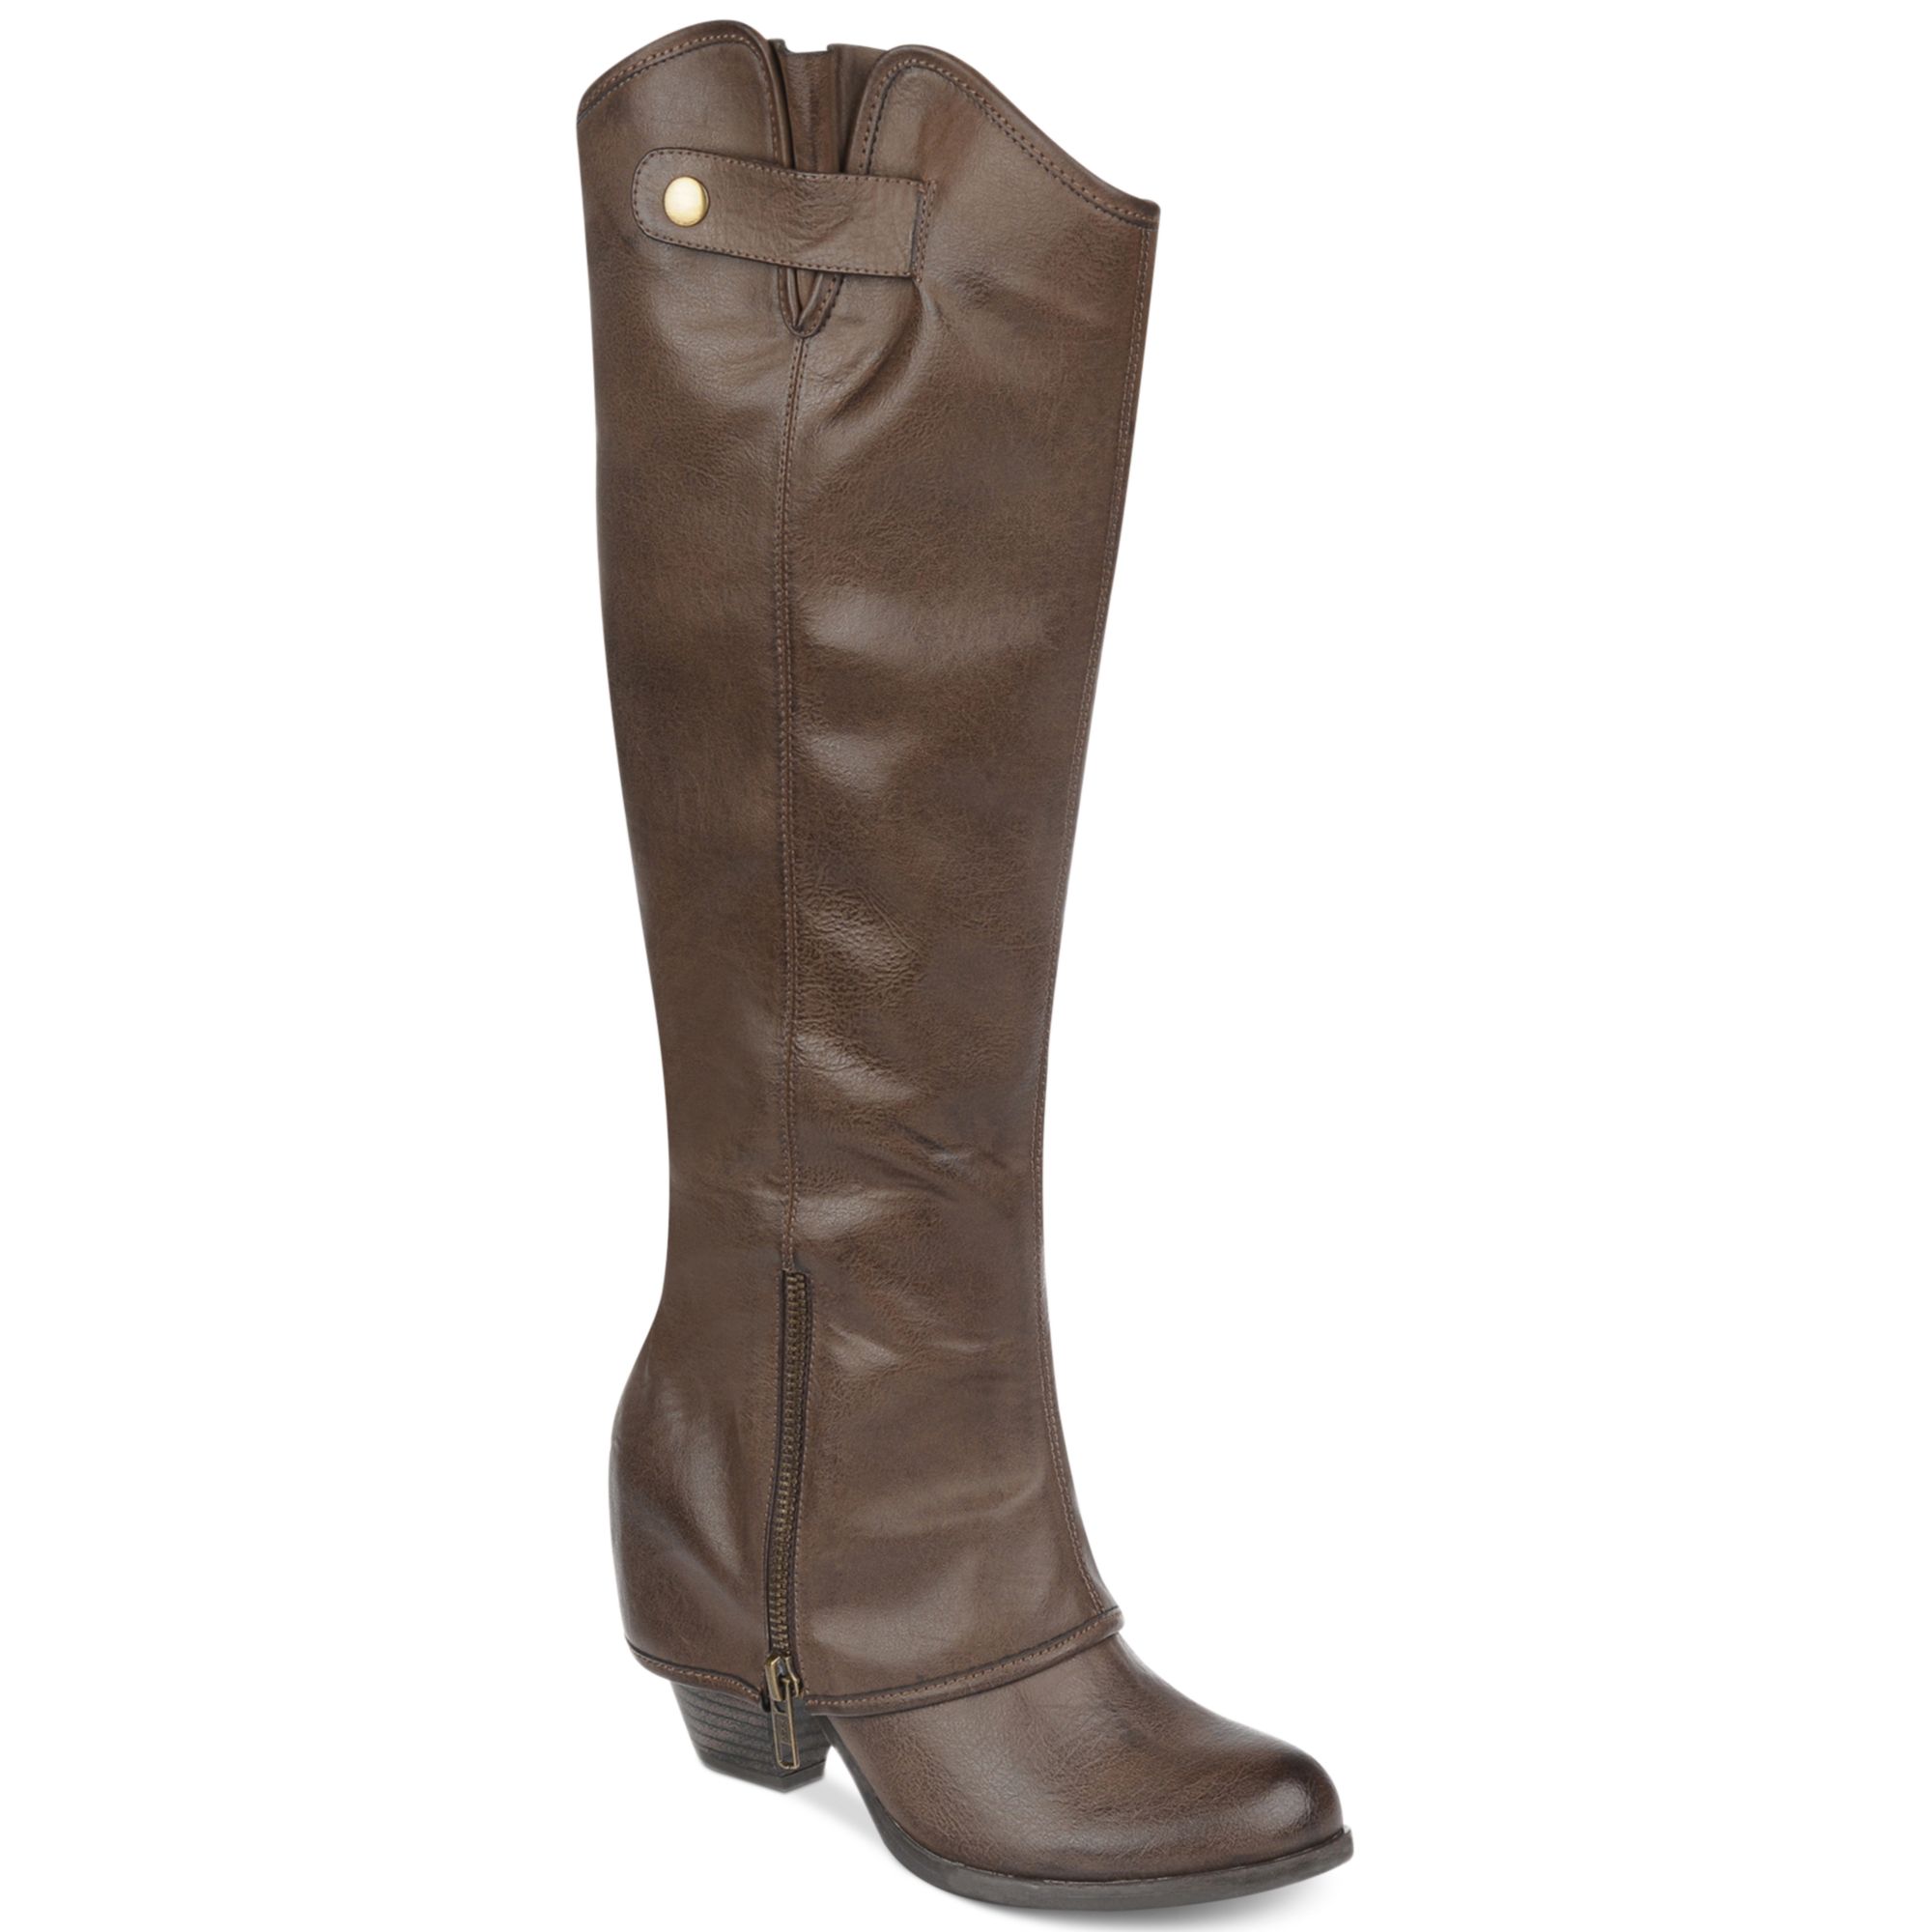 Fergie Fergalicious Boots Ledge Cuffed Tall Shaft Boots in Brown | Lyst